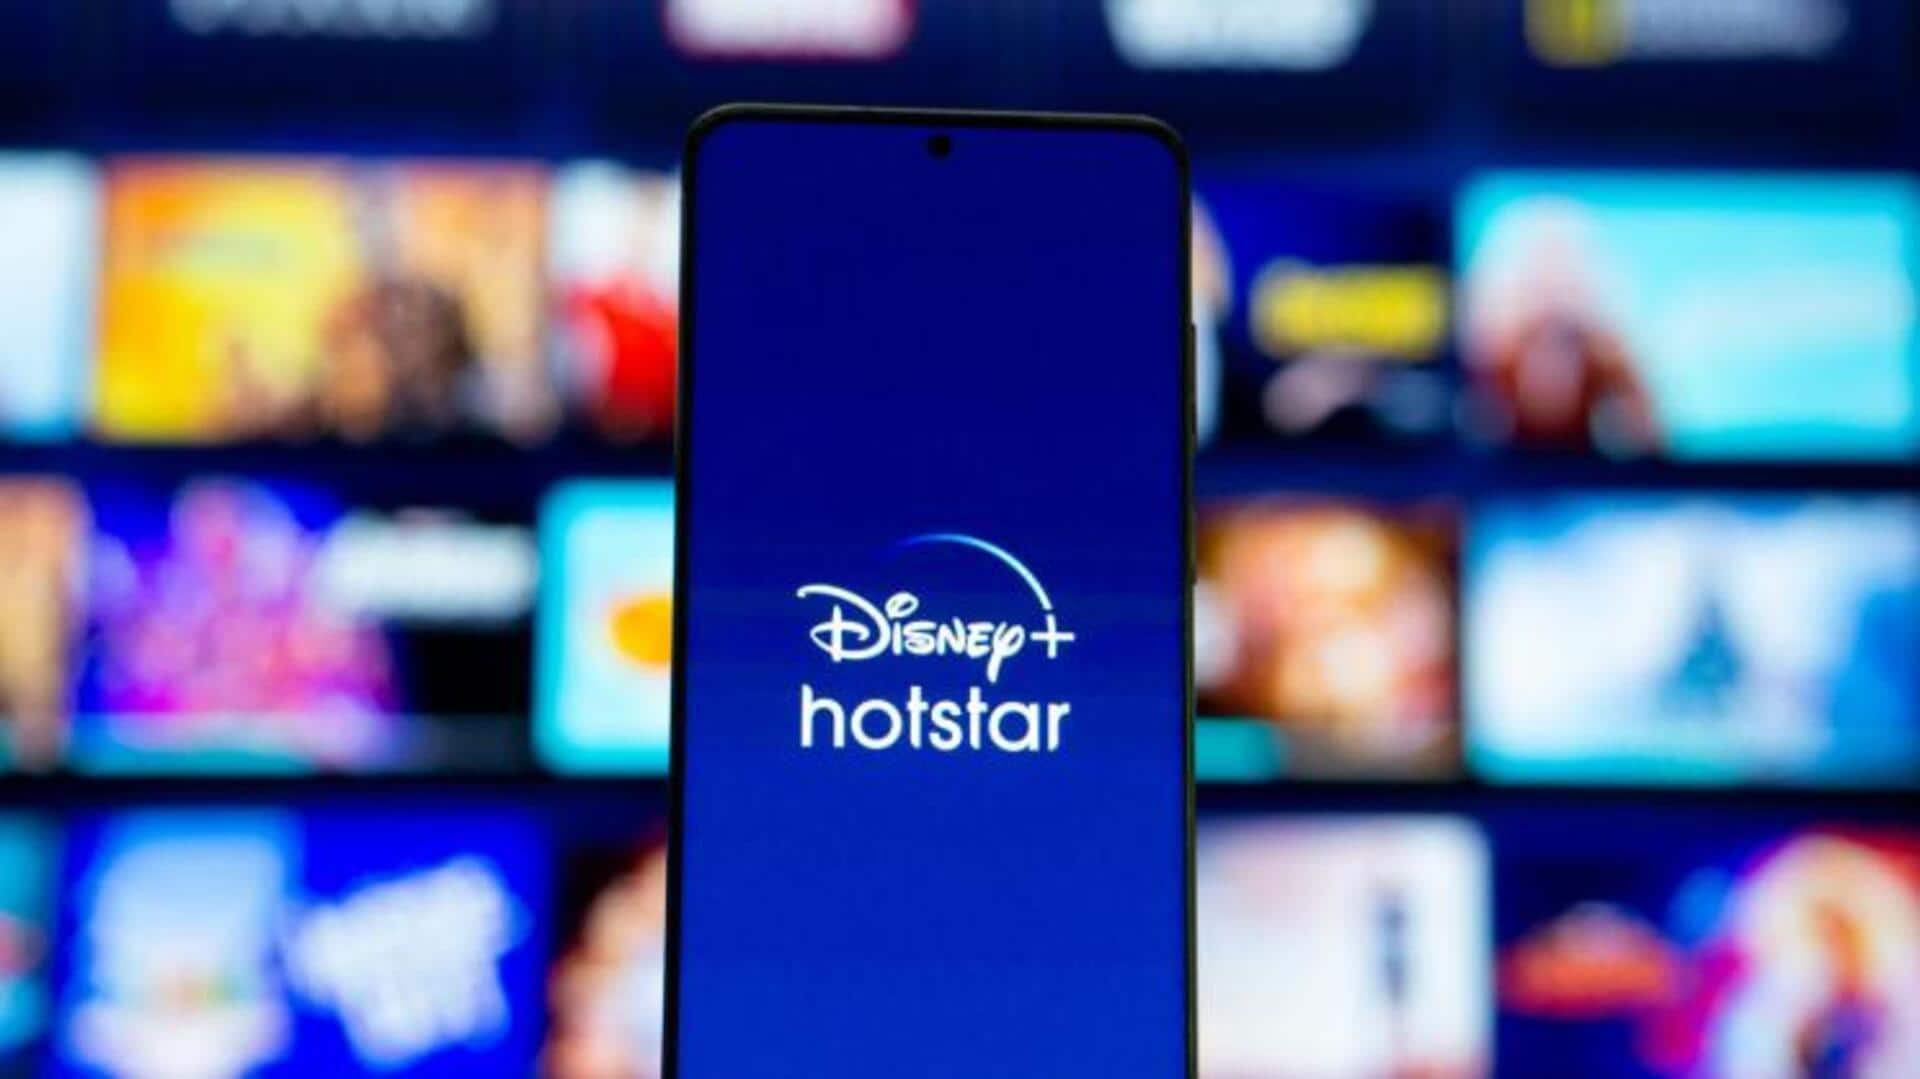 Disney+ Hotstar launches vertical streaming for Men's Cricket World Cup